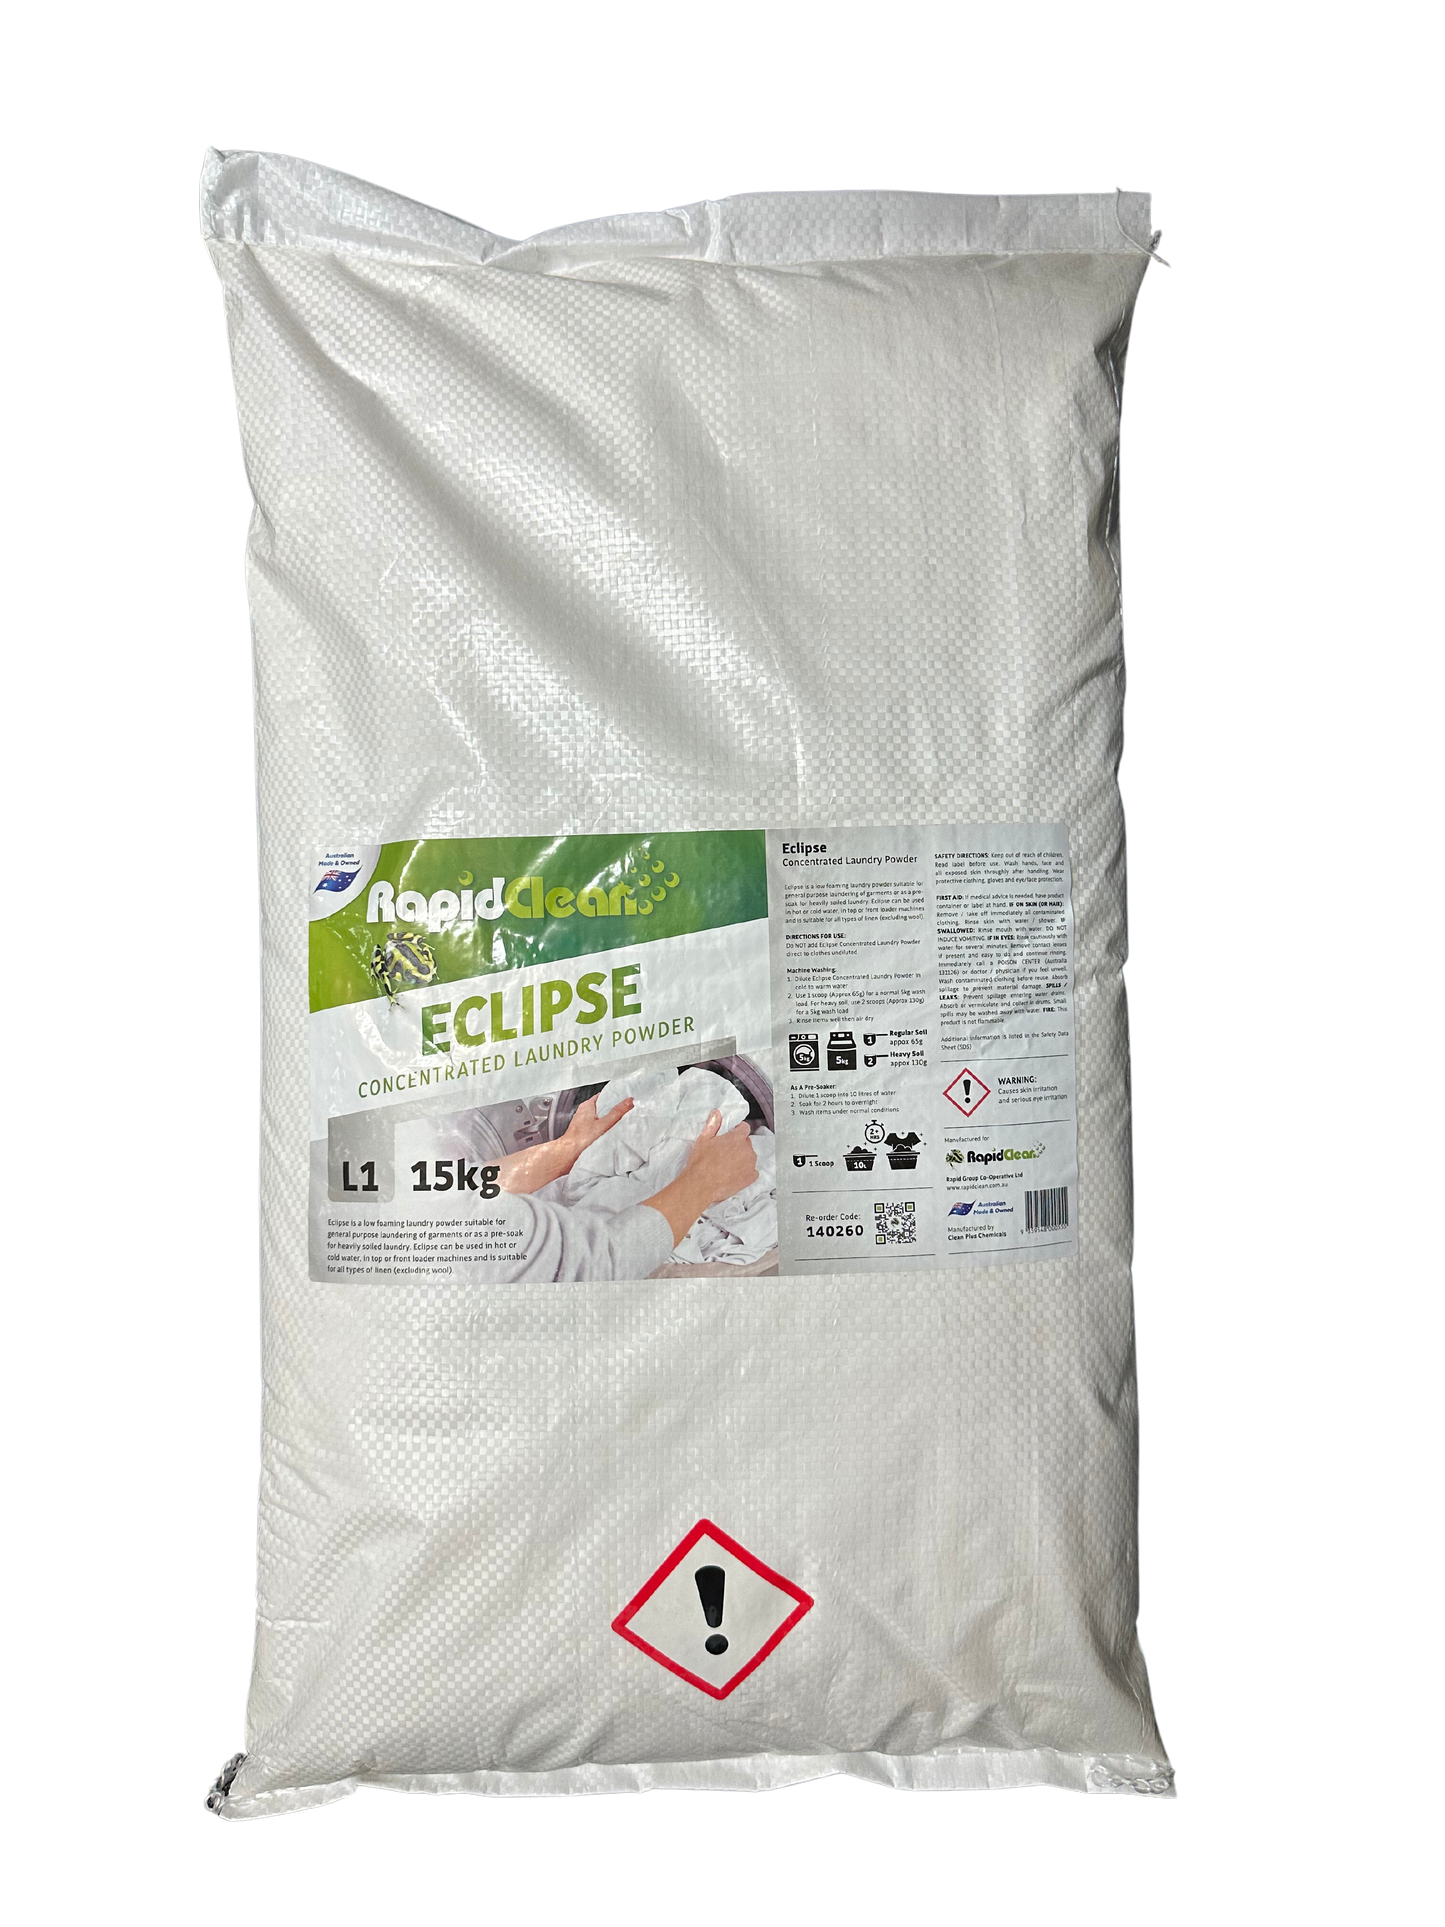 RapidClean Eclipse Concentrated Laundry Powder is a low foaming powder suitable for all types of linen (excluding wool) and is recommended for top/front loading machines. It can be used as a pre-soak for heavily soiled laundry prior to washing. Eclipse is Grey Water safe and complies with Australian standards for phosphate content. Mackay